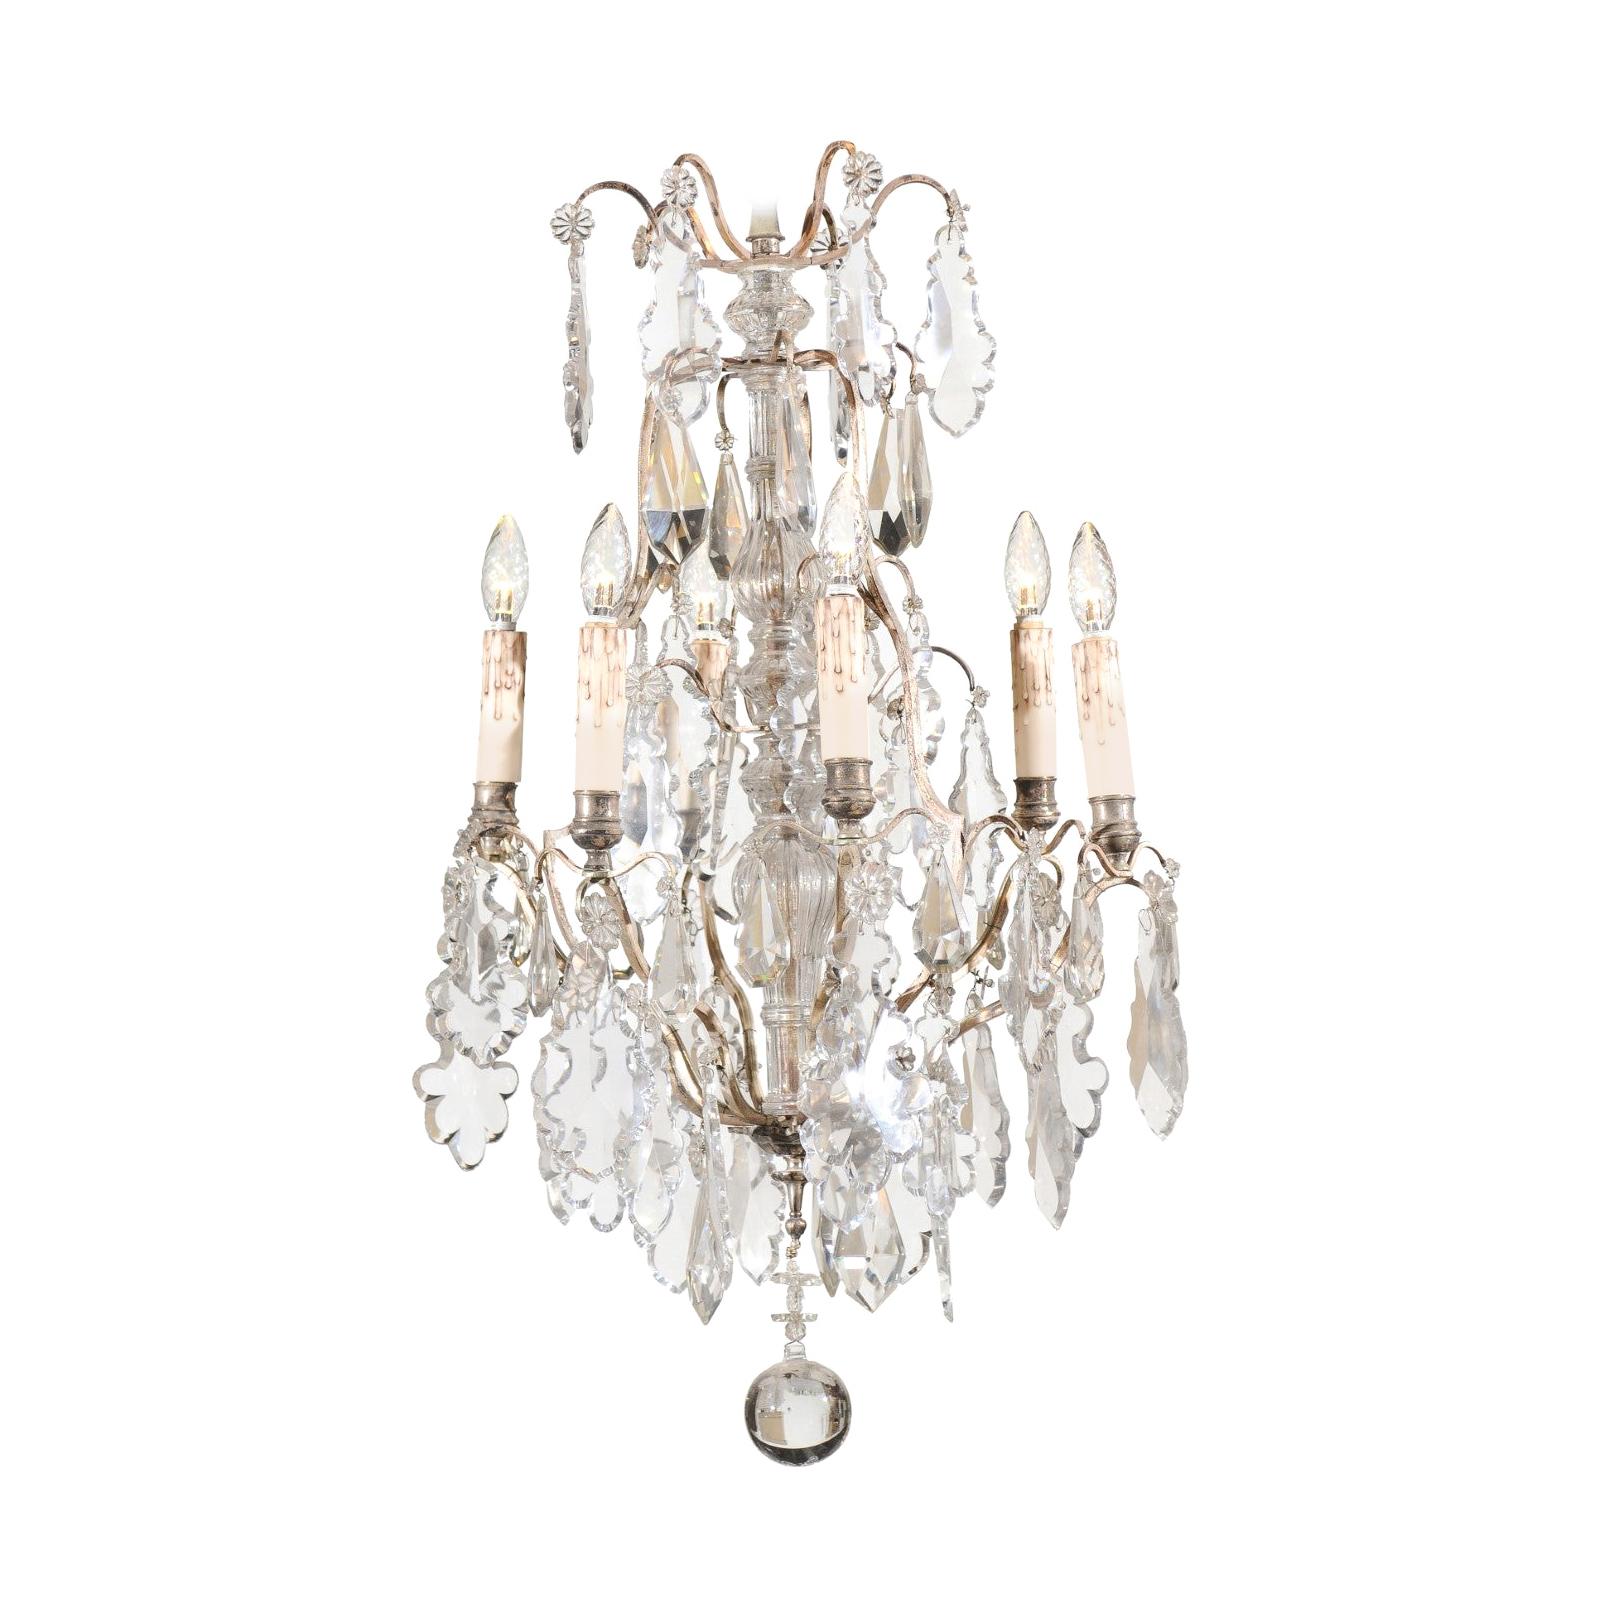 French 19th Century Six-Light Crystal Chandelier with Silvered Armature